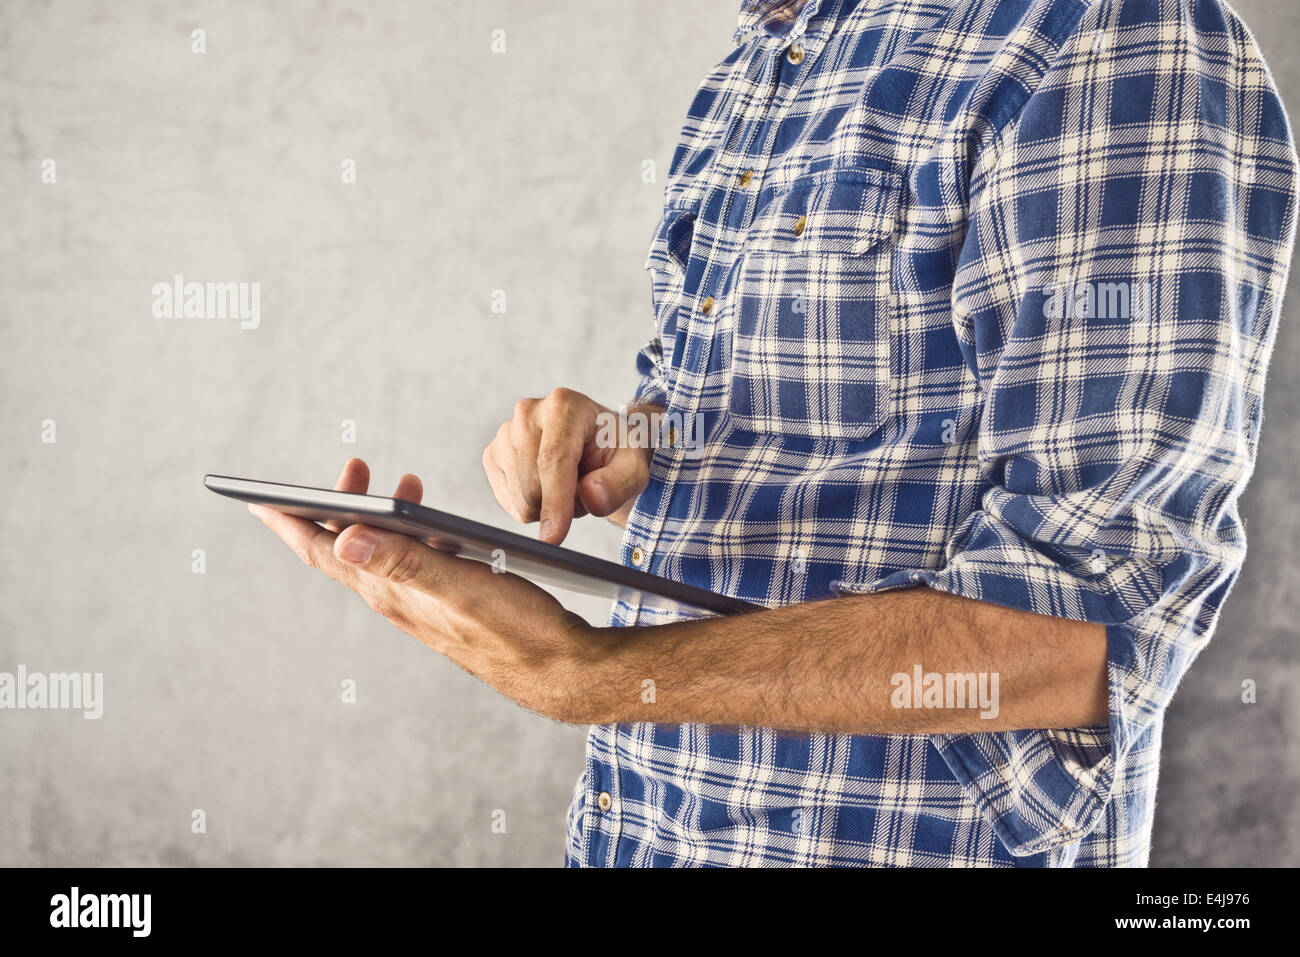 Man holding digital tablet computer and taping the touch screen of modern 10 inch display gadget. Stock Photo